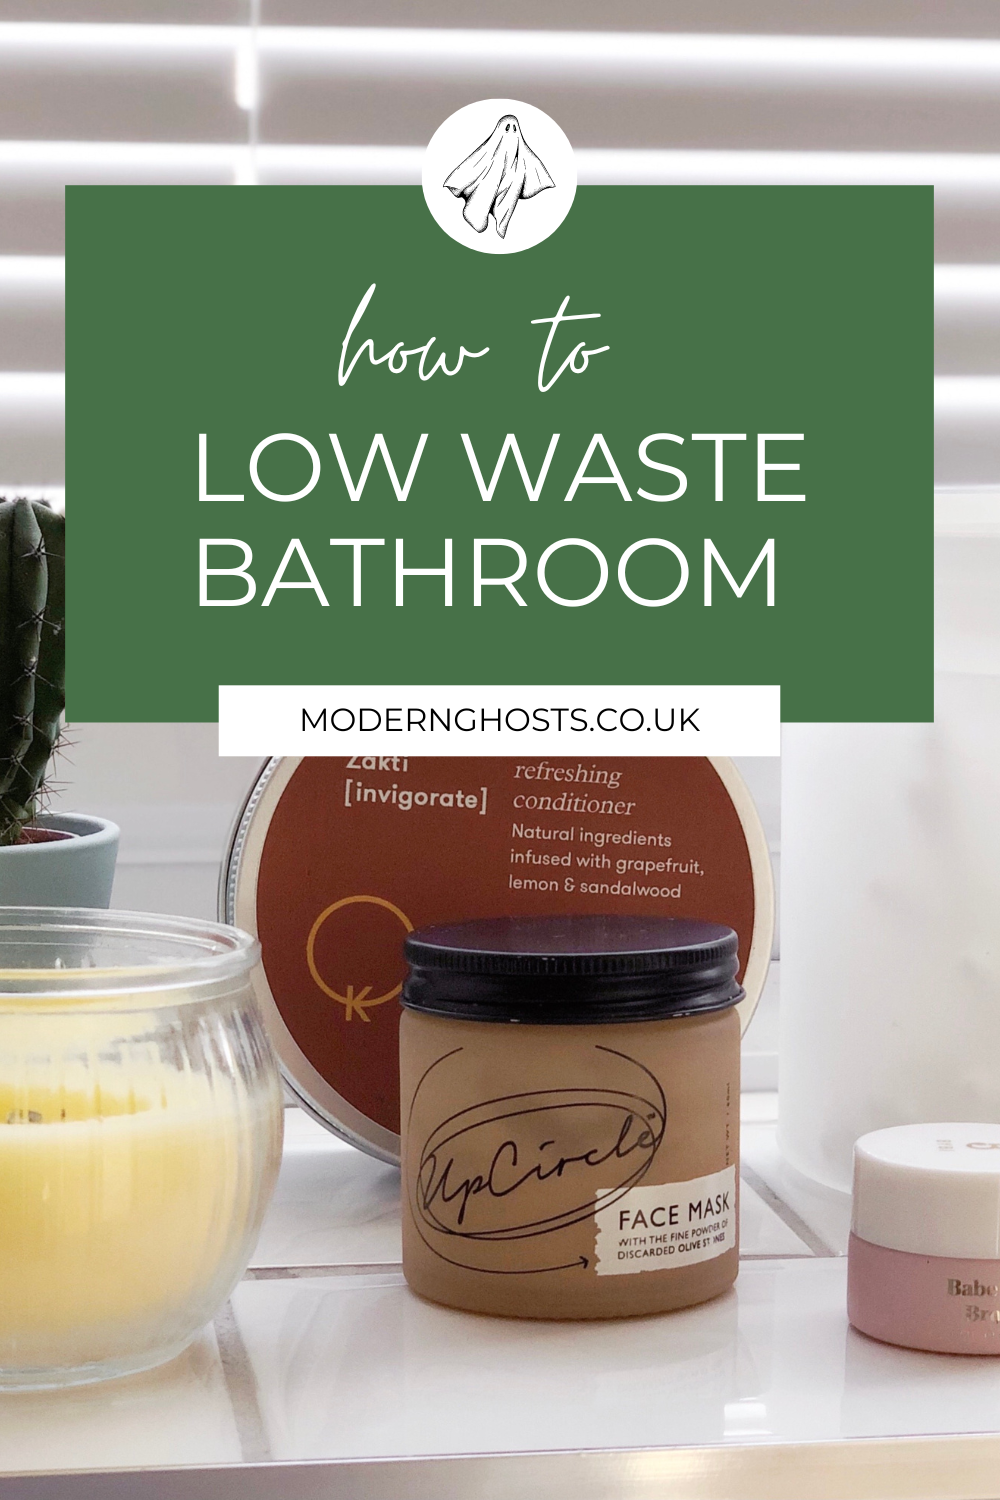 How to make your bathroom low waste